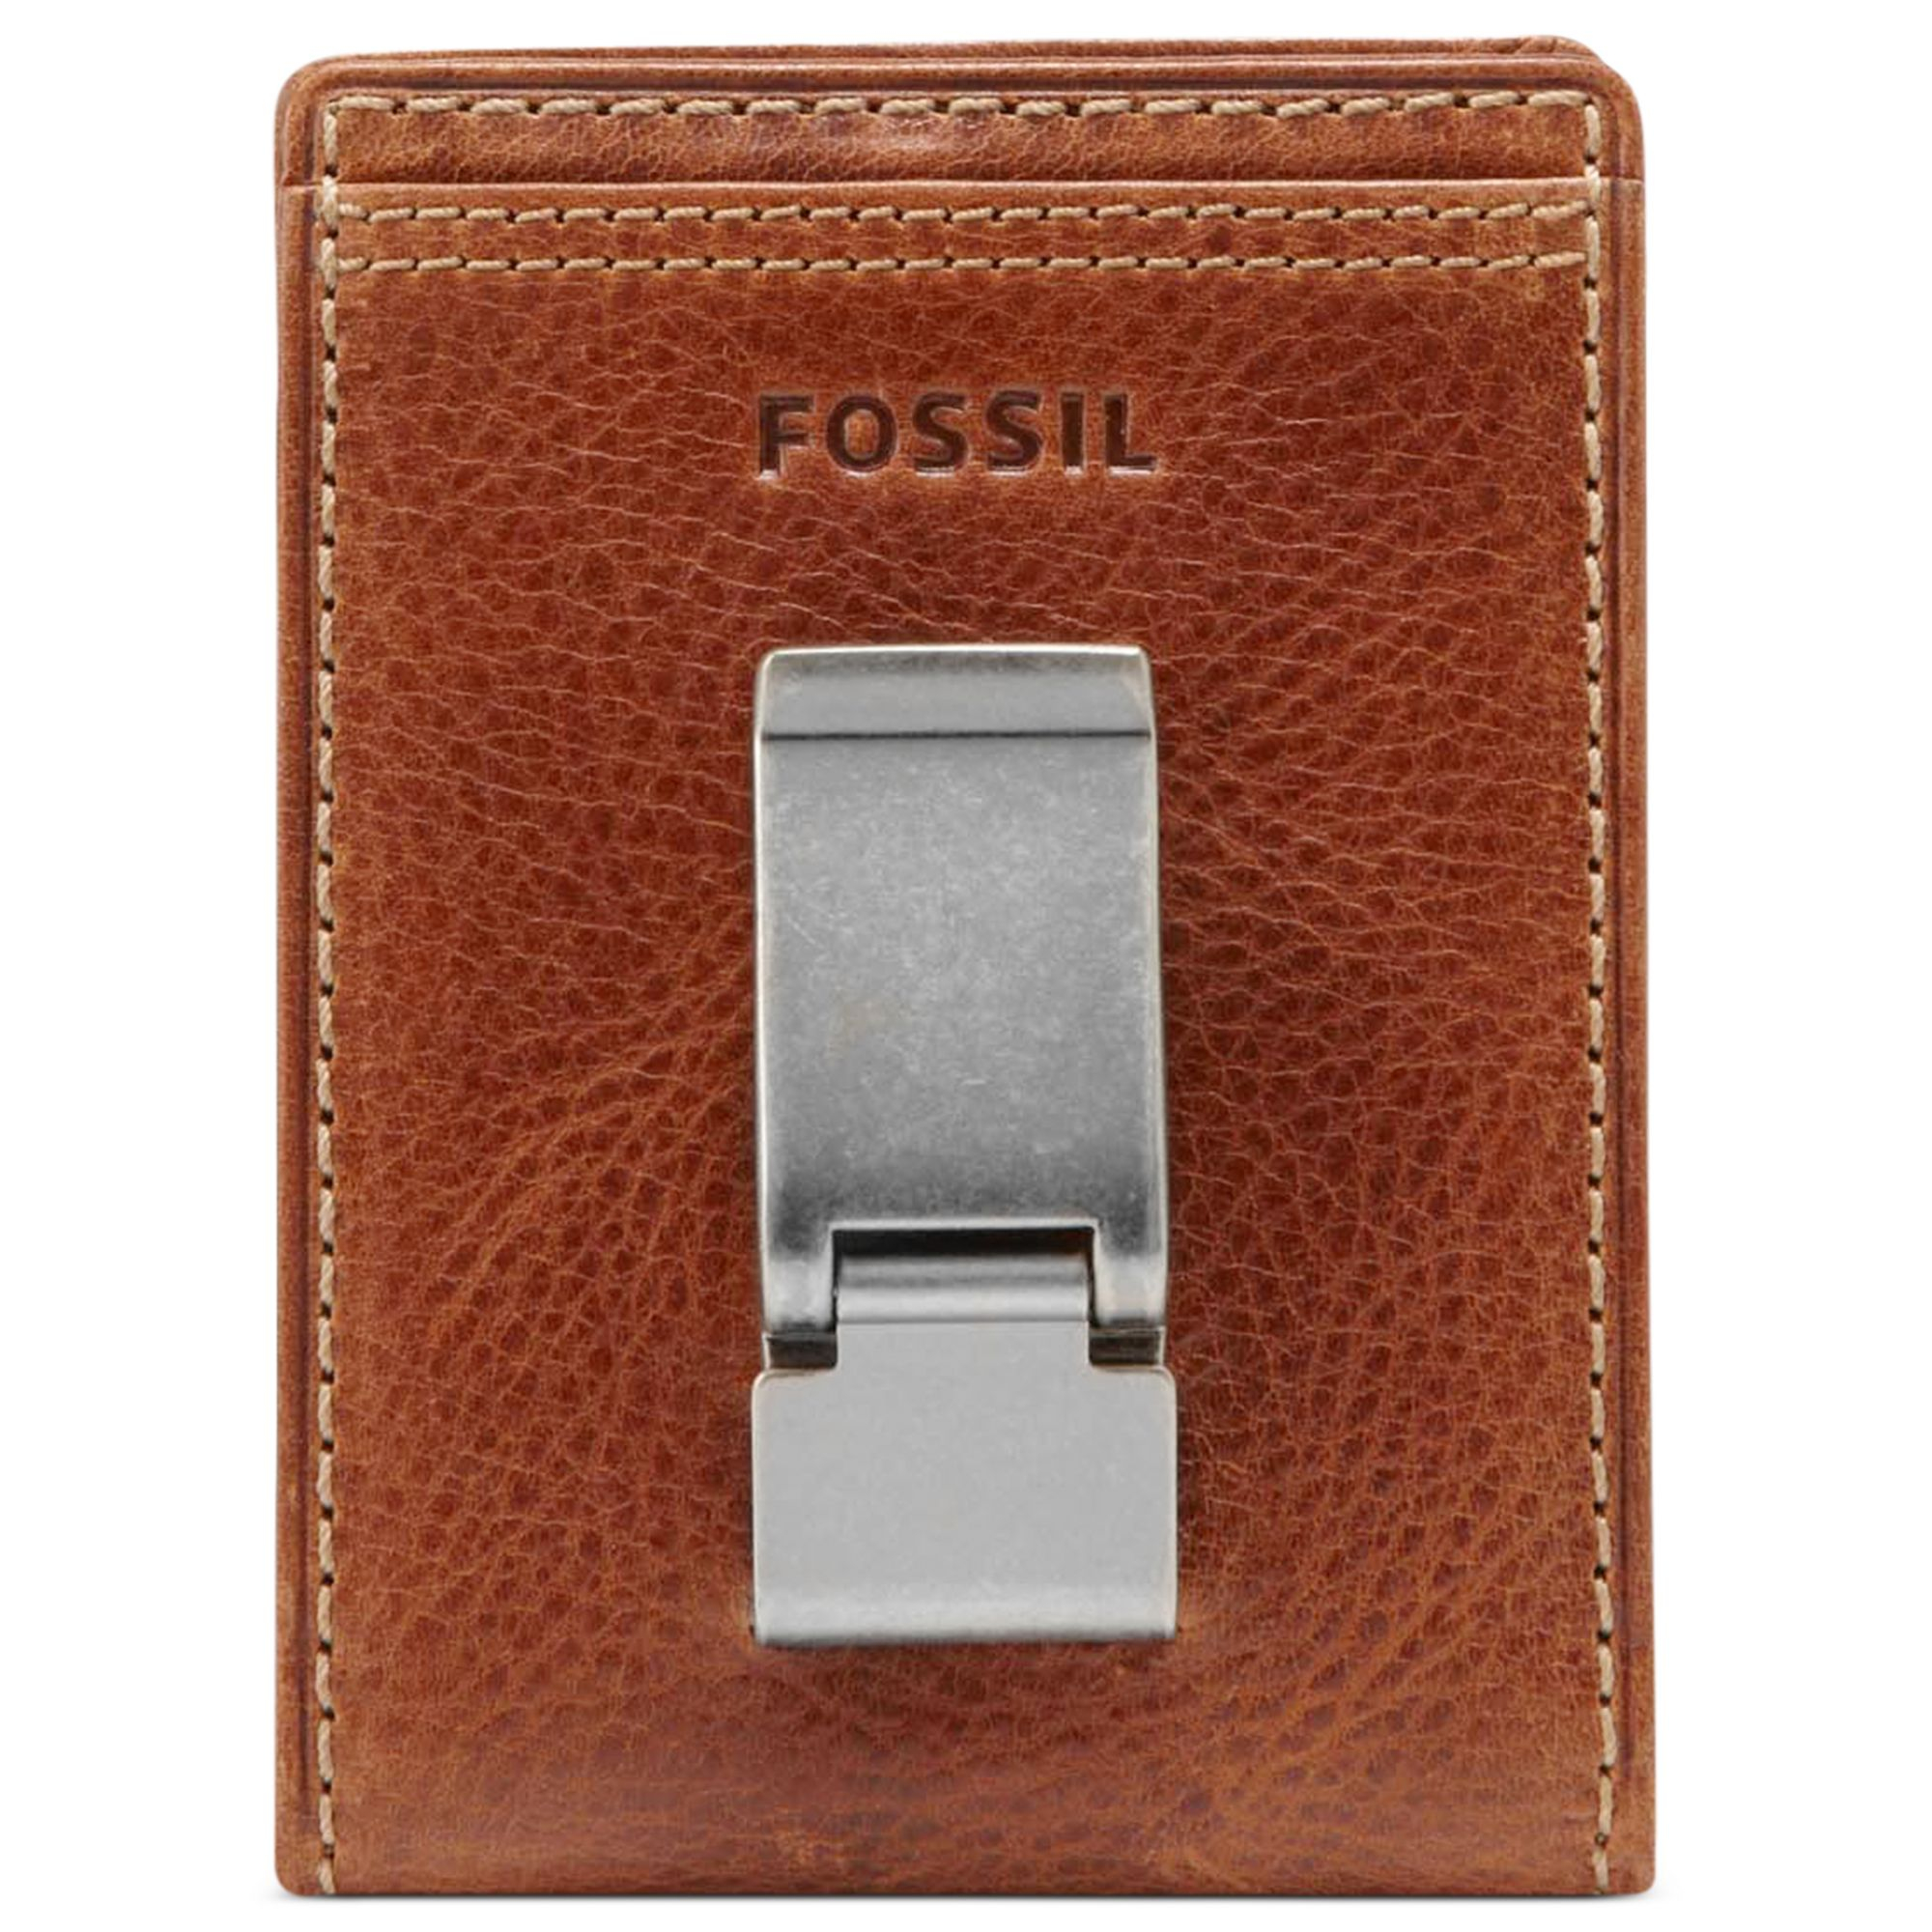 Fossil Front Pocket Wallet Andrew New In Box